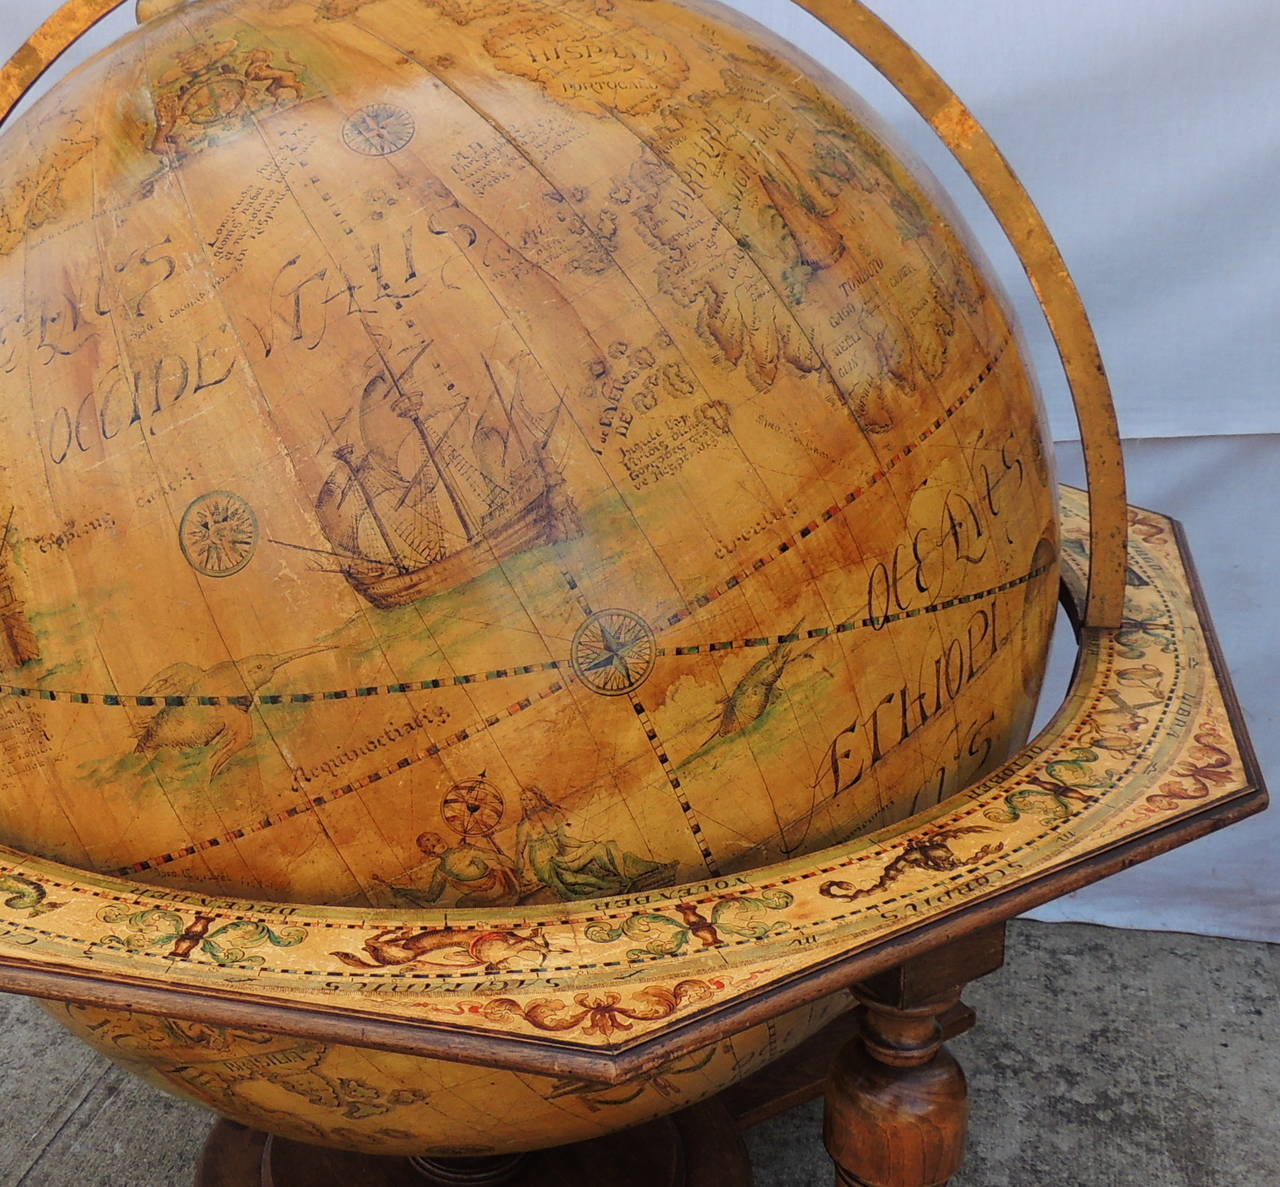 This monumentally large & Wonderful vintage World Globe with Celestial Markings around the frame is sure to be a wonderful centerpiece in that special room. The top of the frame is marked with the astrological signs.  A wonderful aged patina with